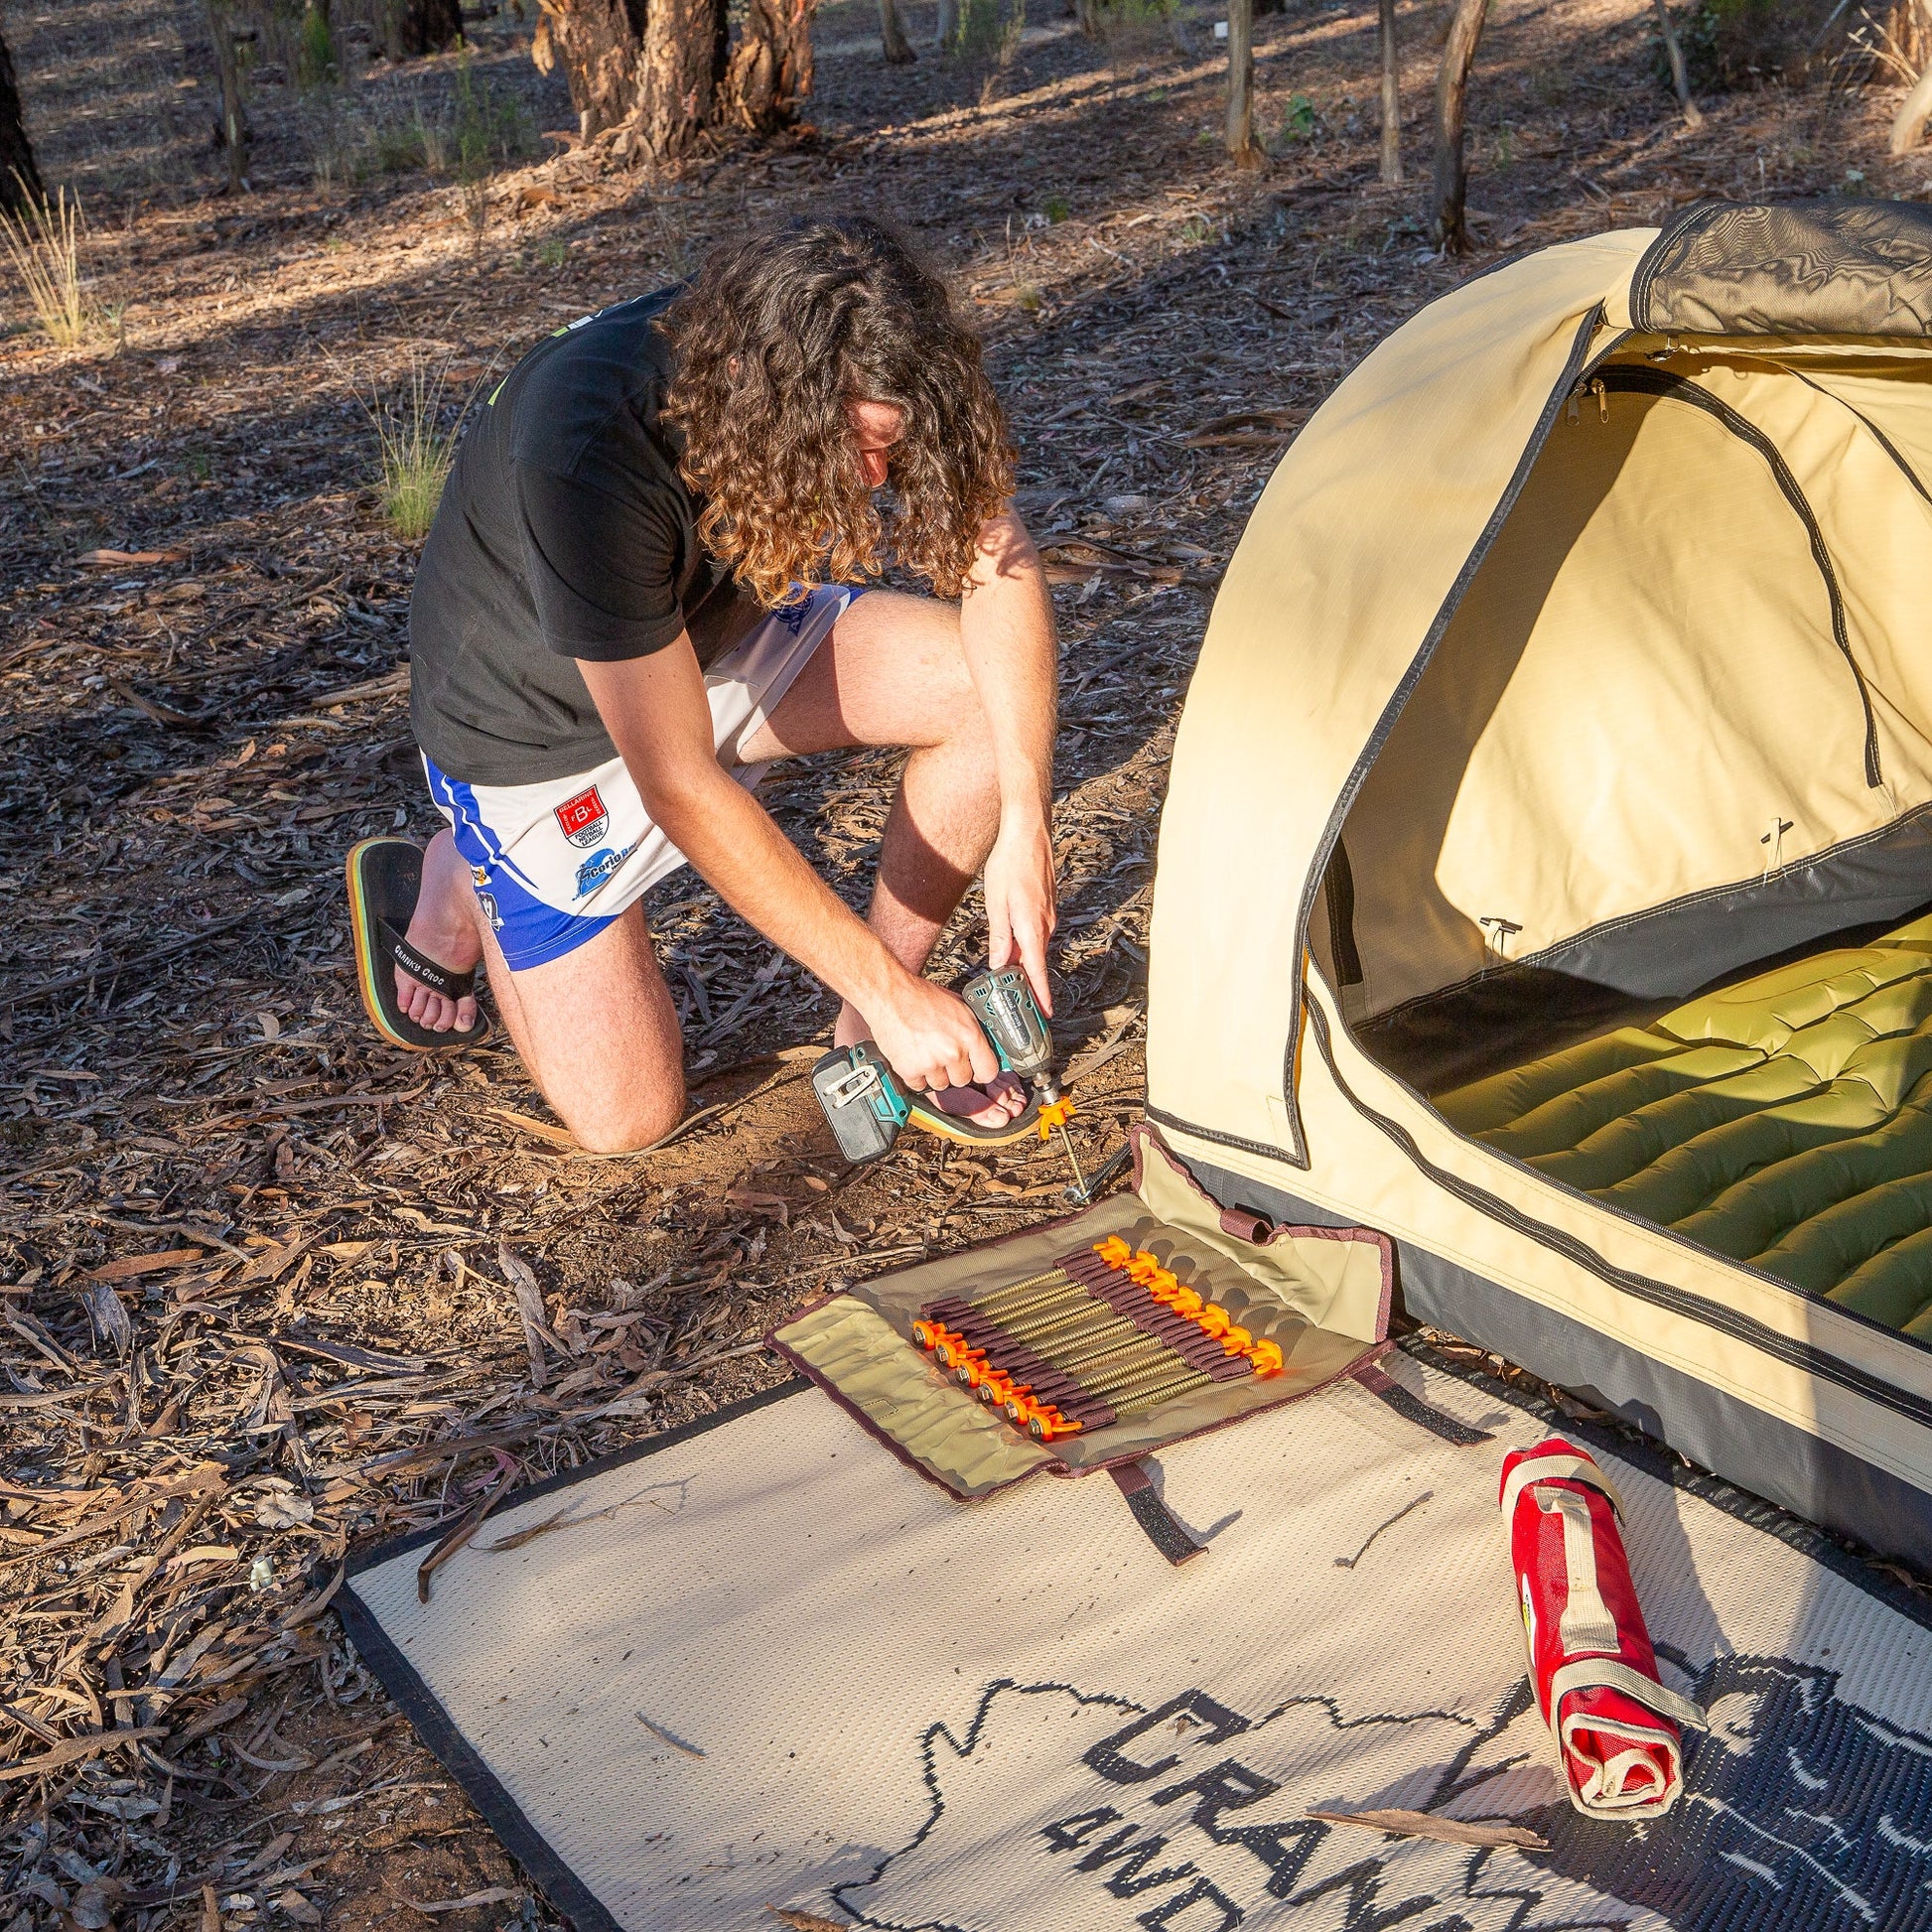 Man boy crouching next to Inflatable swag drilling screw in tent pegs into ground for inflatible swag 